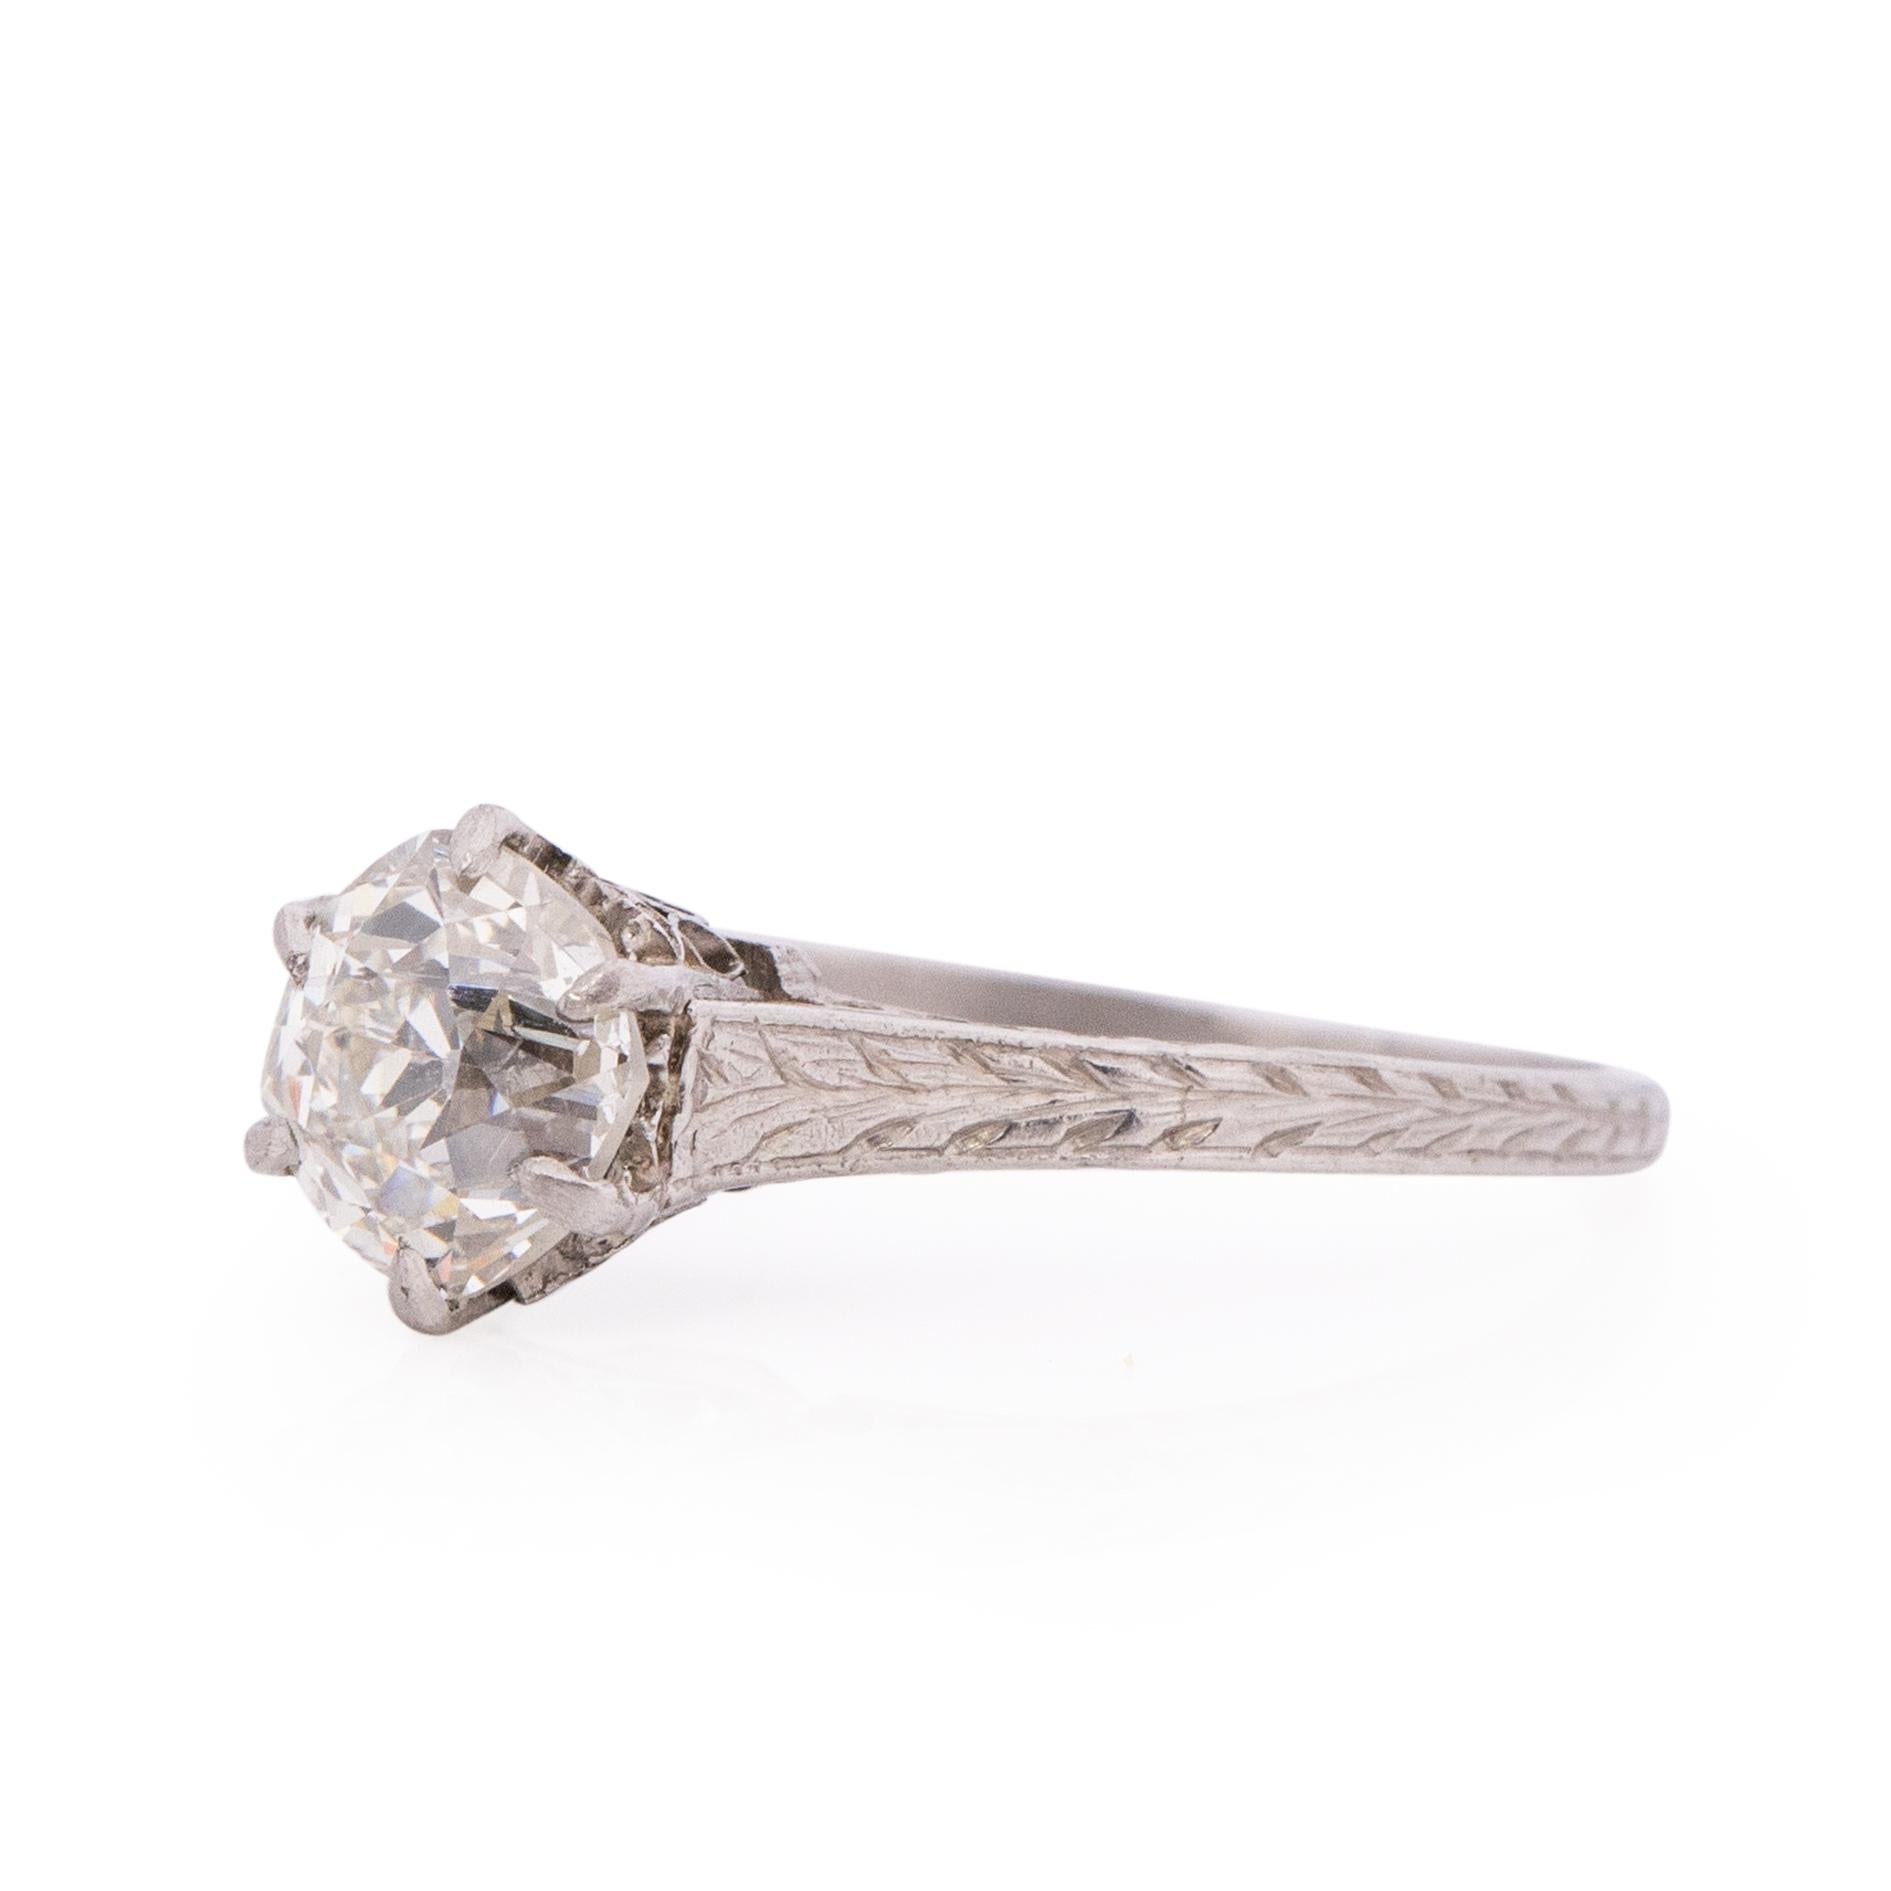 Here we have a simple elegant Edwardian solitaire engagement ring. The old European cut diamond sits in a cathedral setting. The gallery has gorgeous designed open work surrounded by cathedral shanks that have a clan chevron design nearly all the